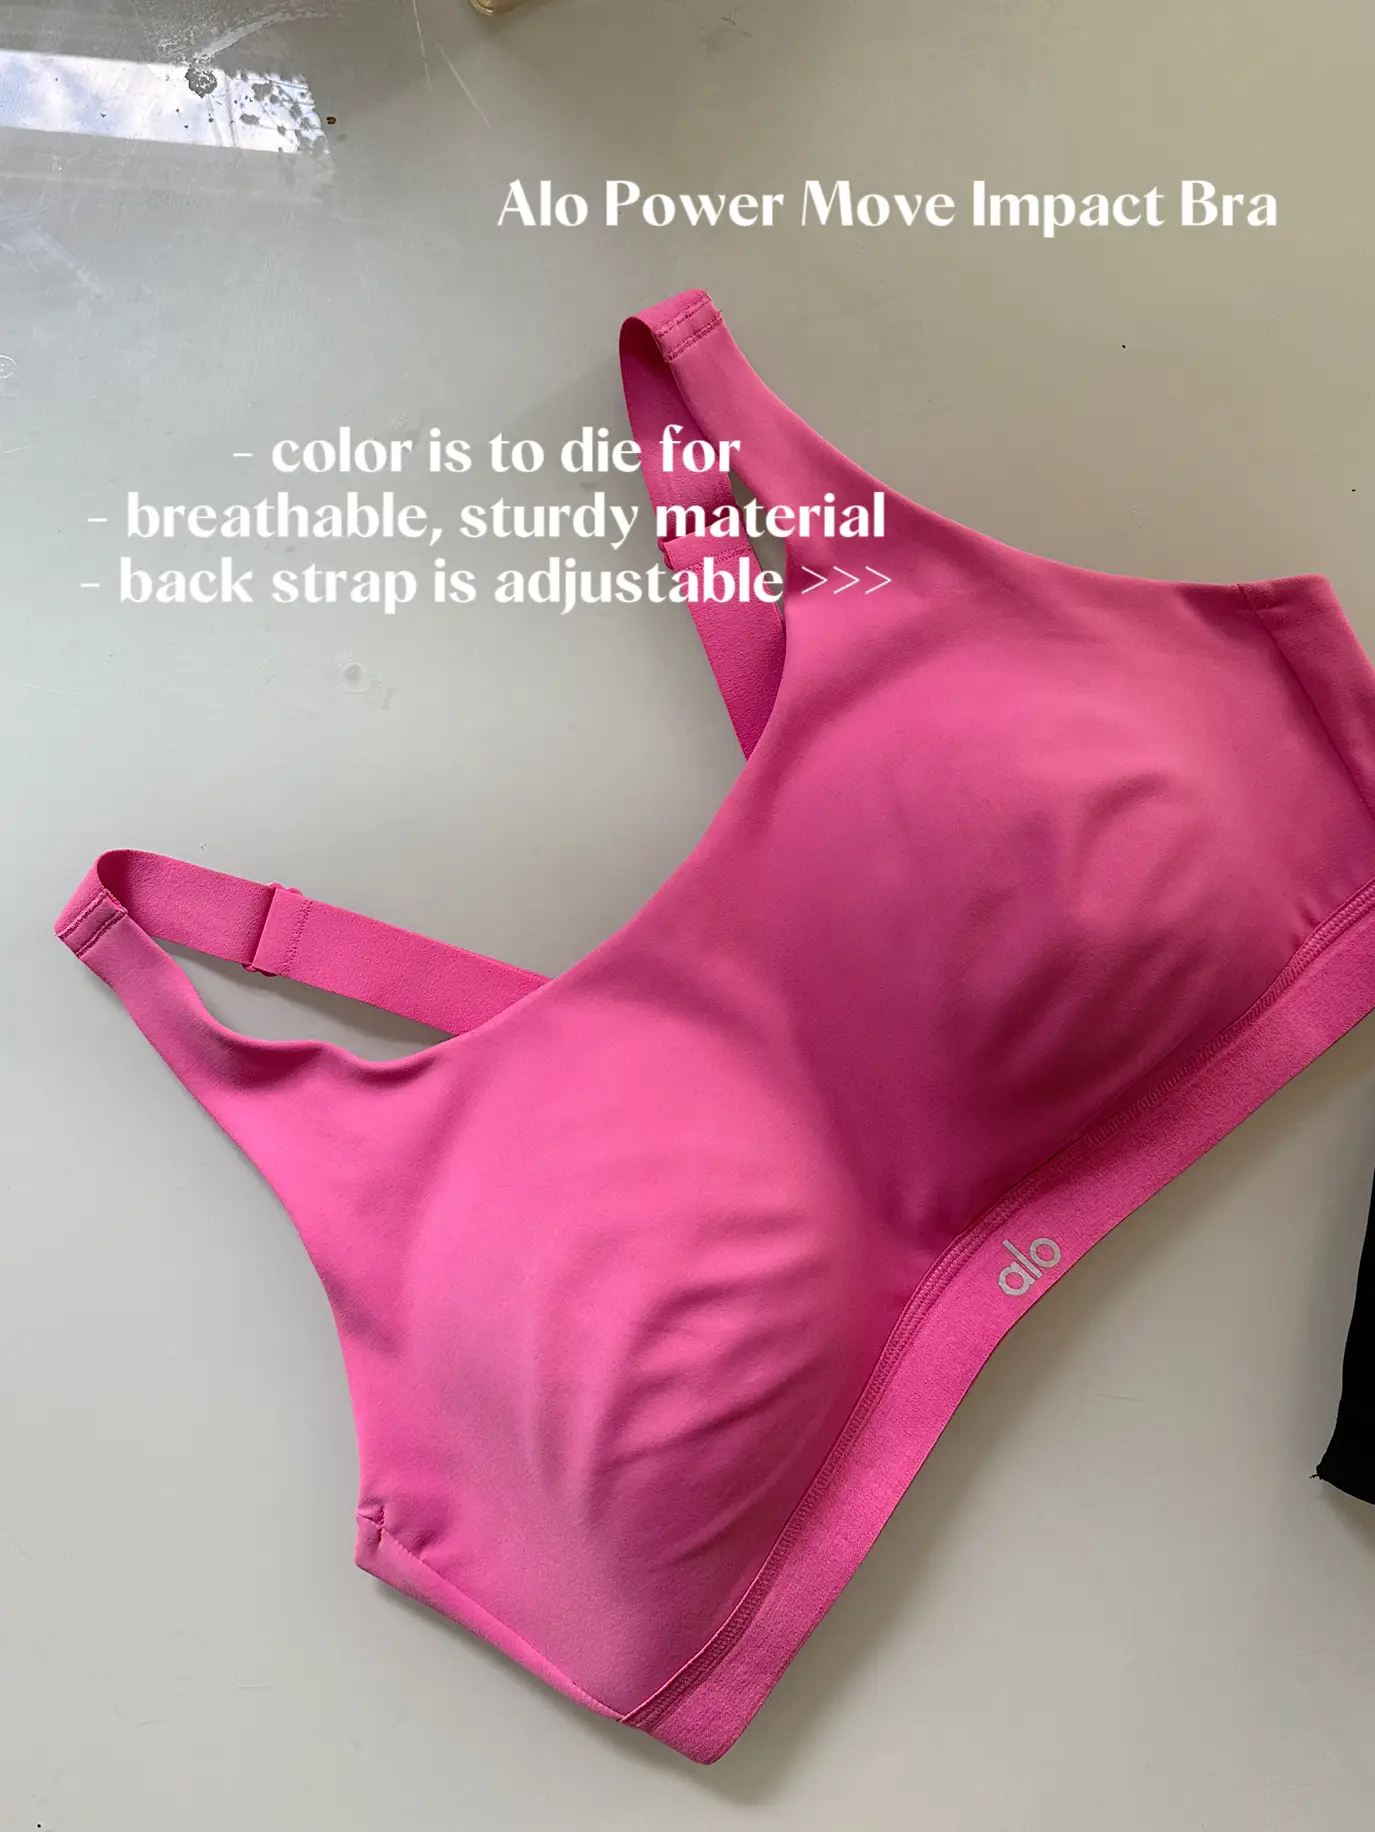 Is the $70 SHEFIT bra worth it for busty gals